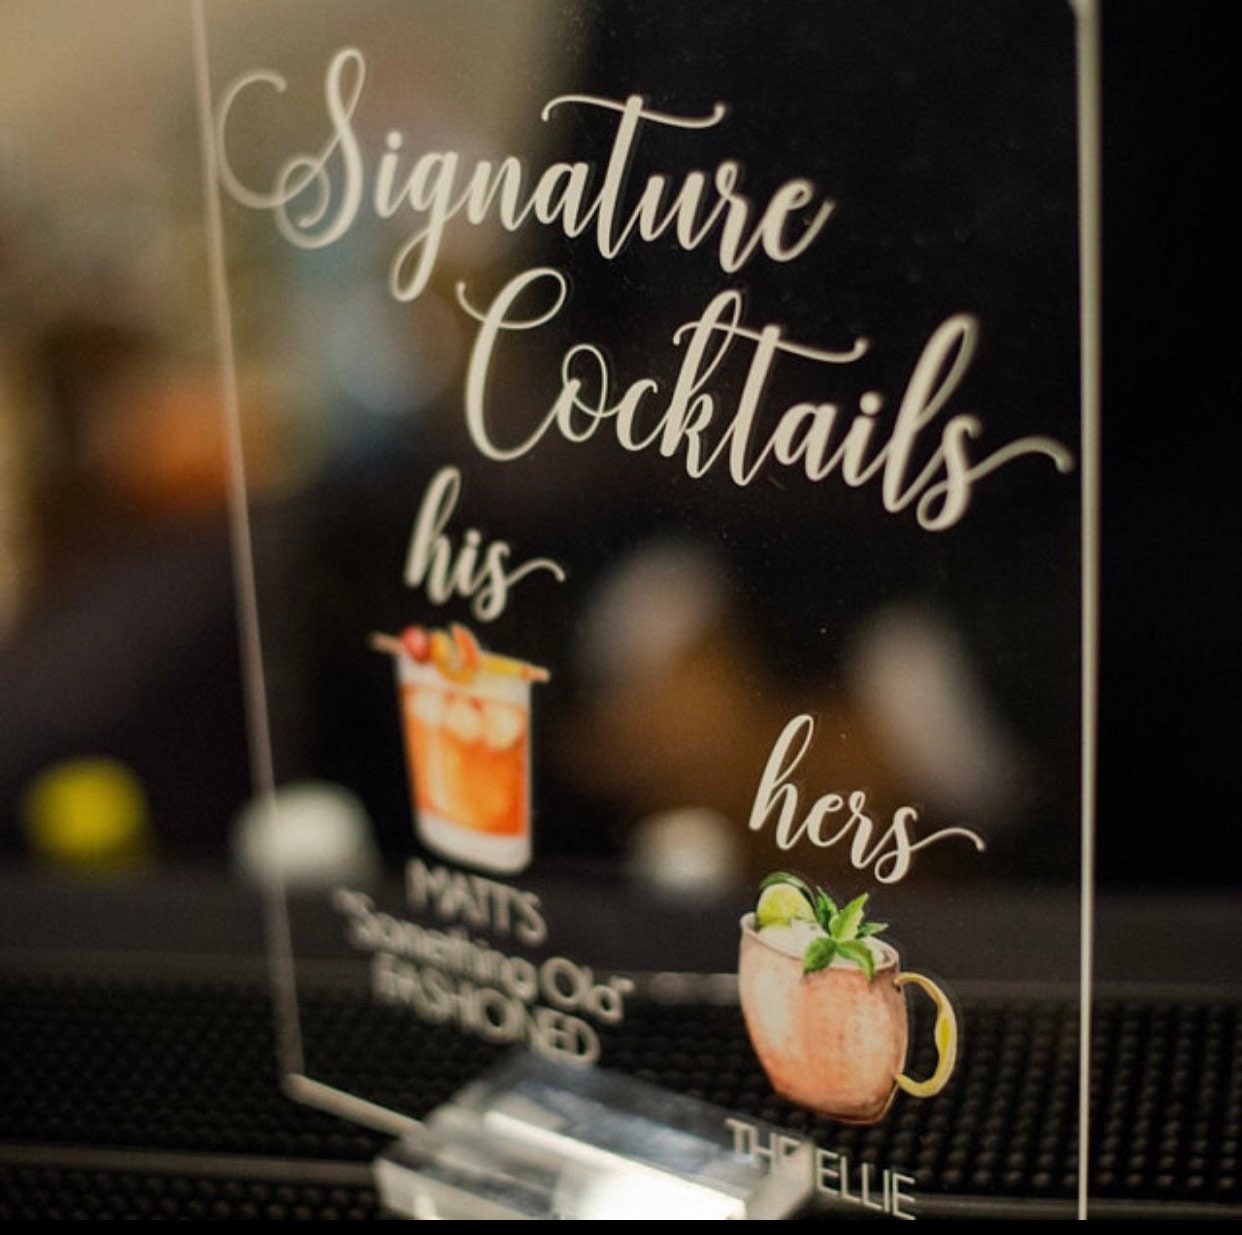 ARCH Bar Menu Signature Cocktails Custom Clear Glass Look Acrylic Wedd -  Pink Posies and Pearls